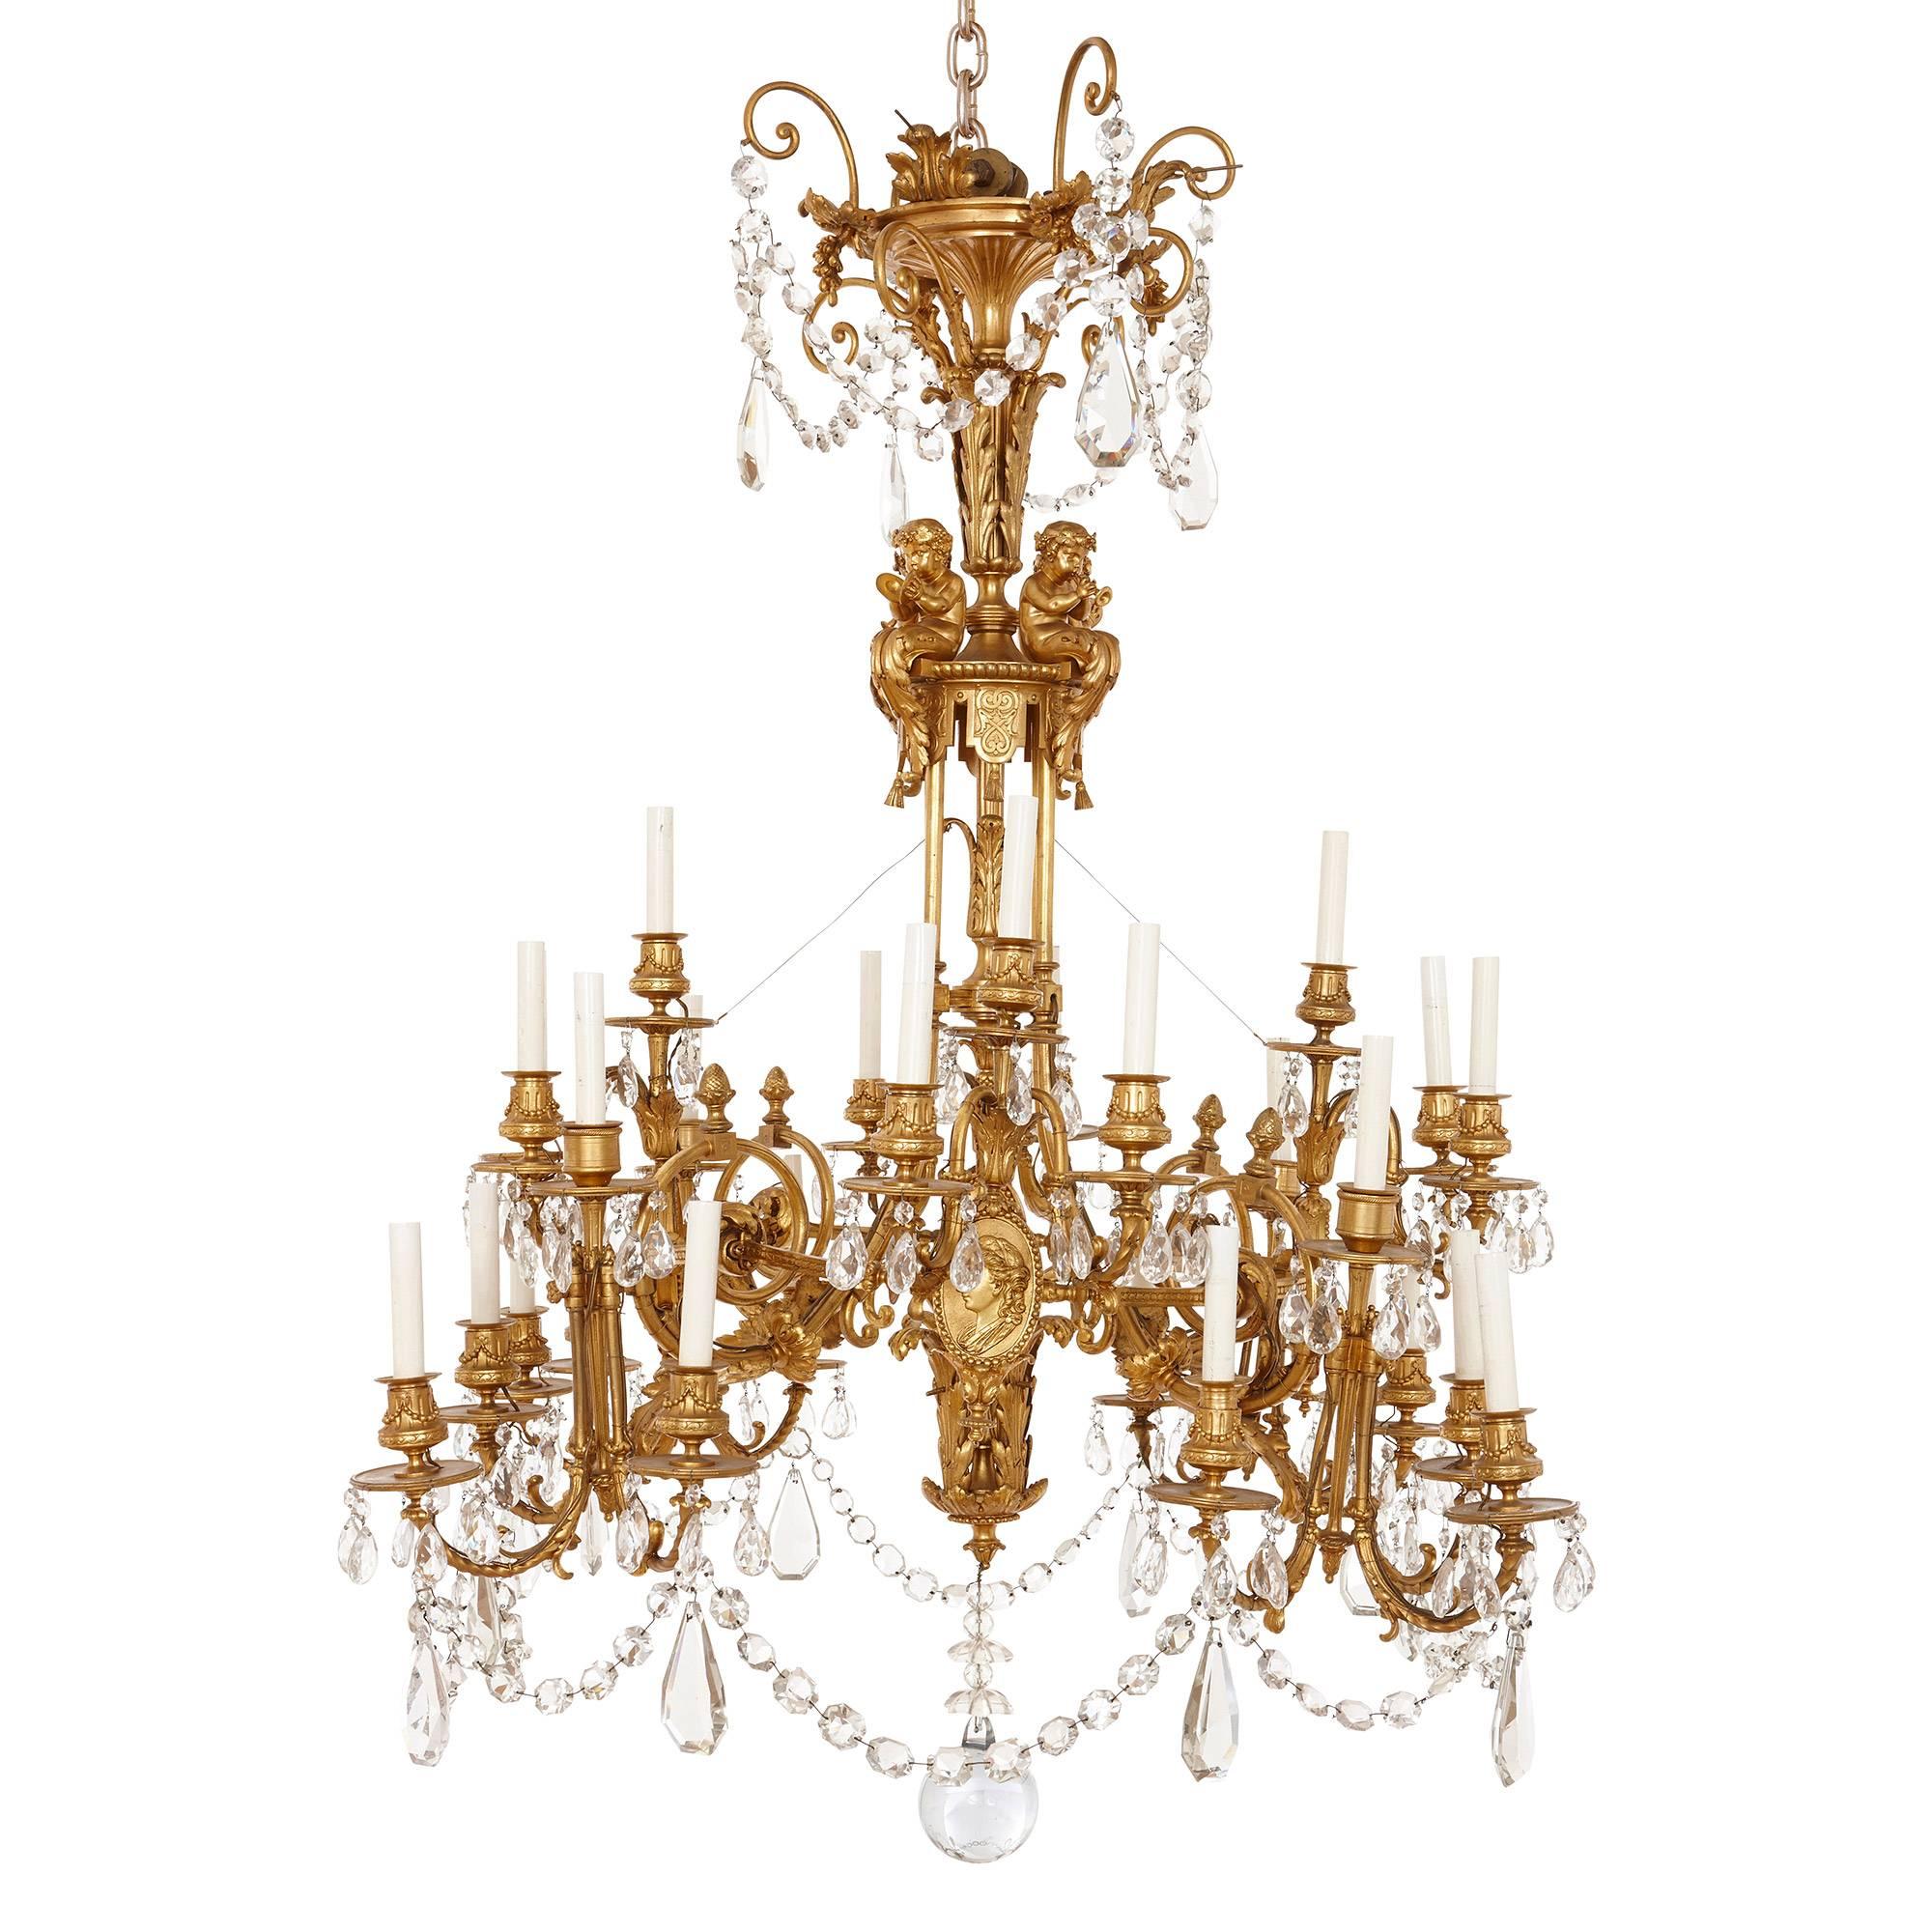 French Antique Neoclassical Style Gilt Bronze and Cut-Glass Chandelier